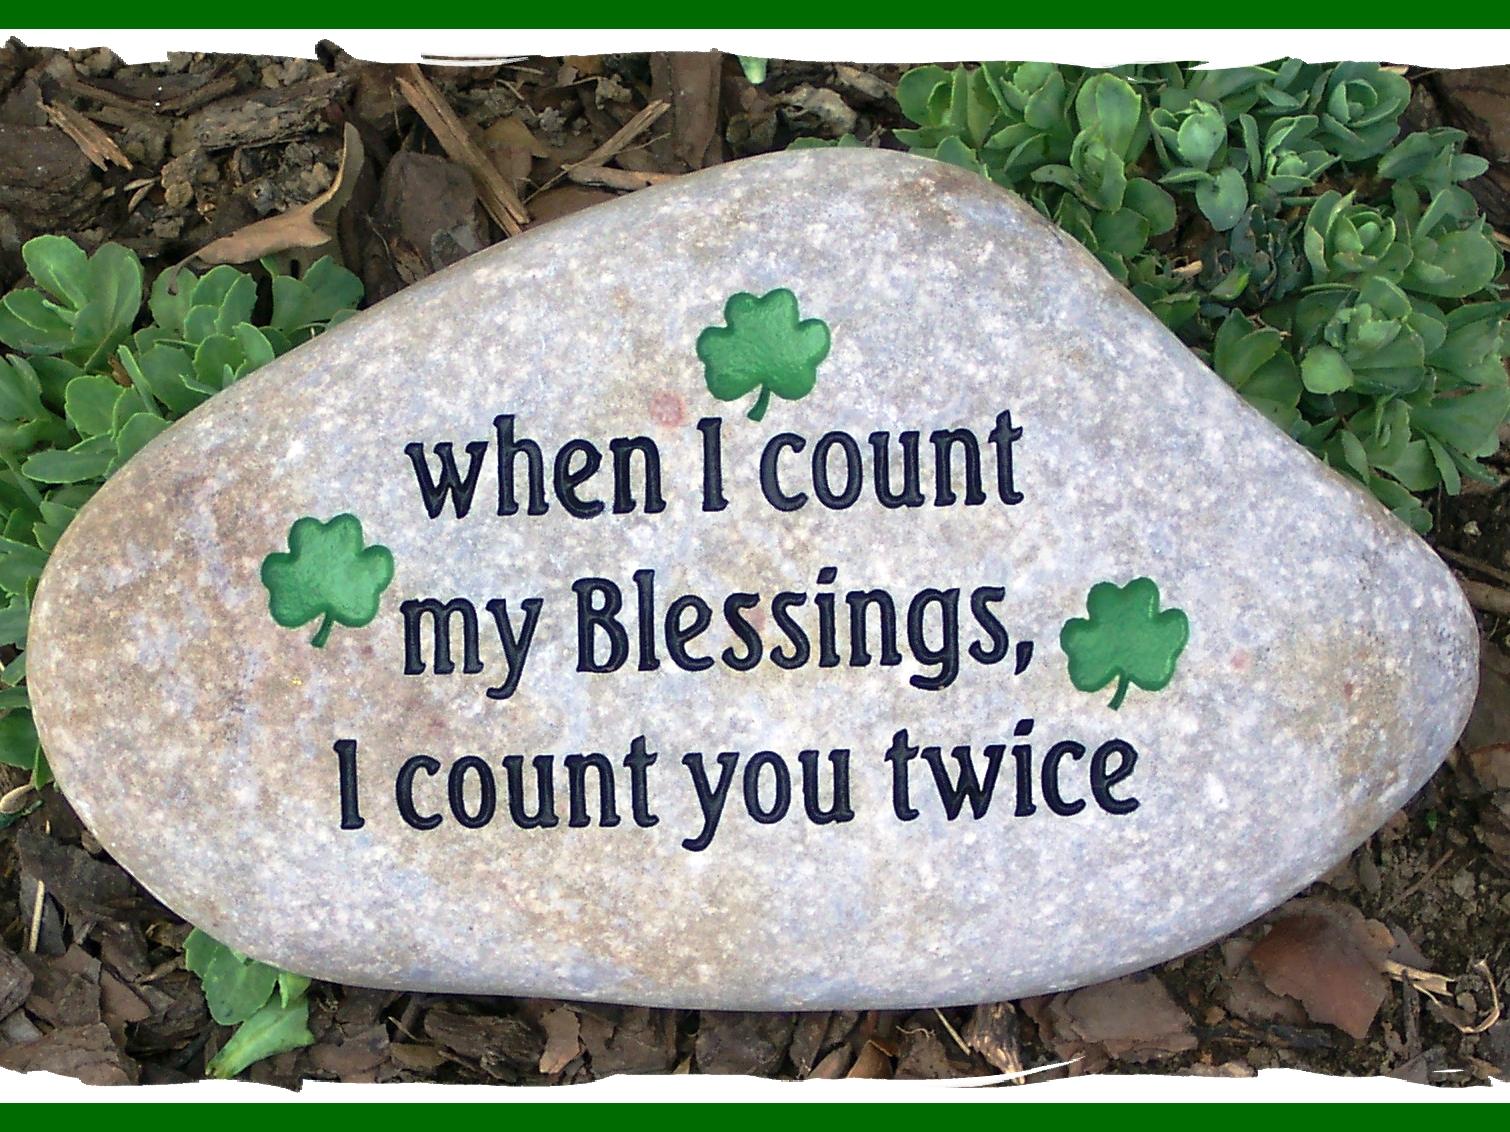 Quotes images patricks day st and 